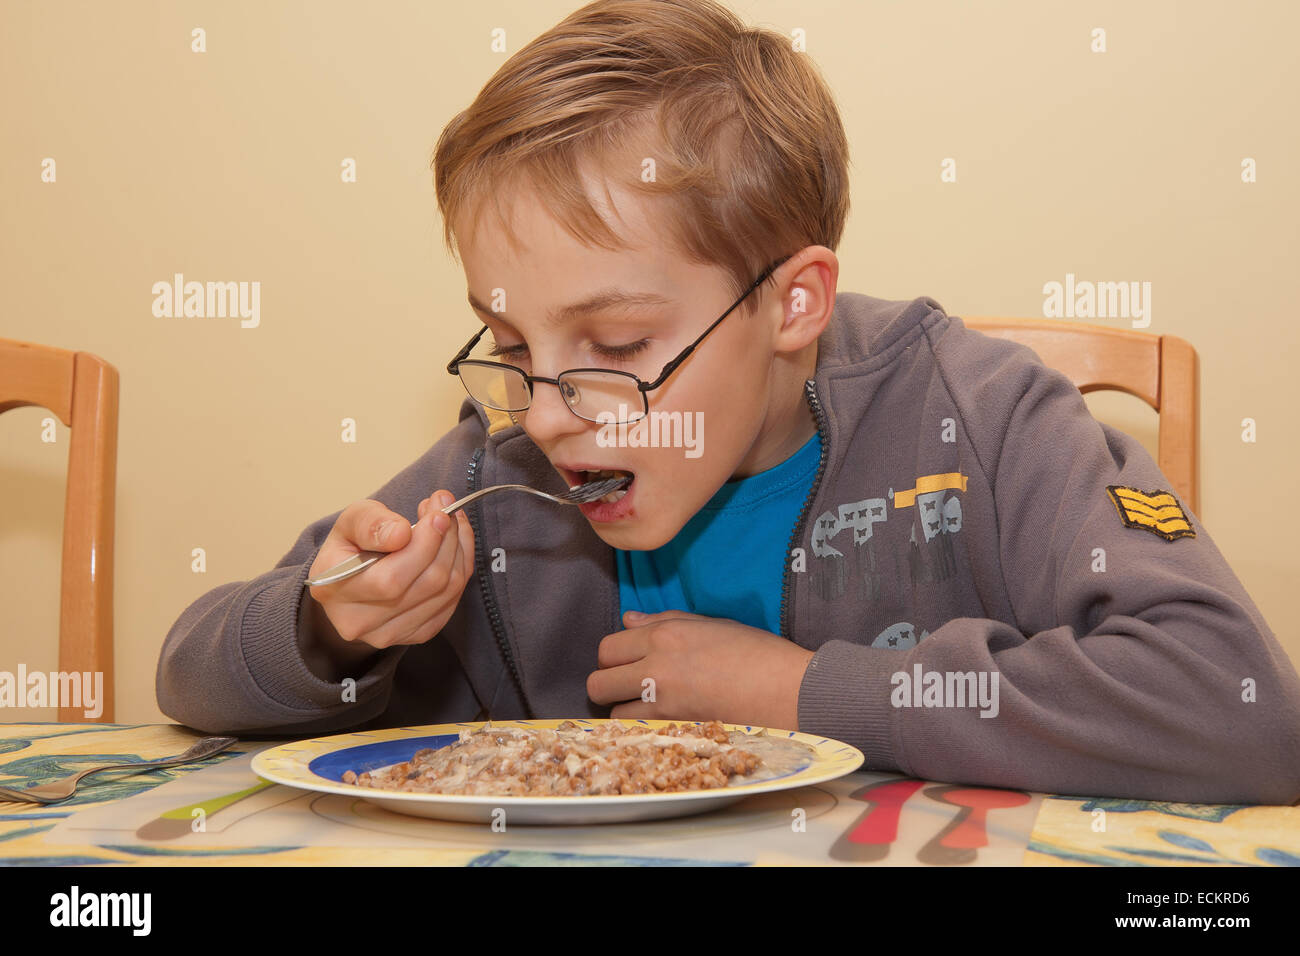 A small boy is eating his meal sitting at the table. Stock Photo